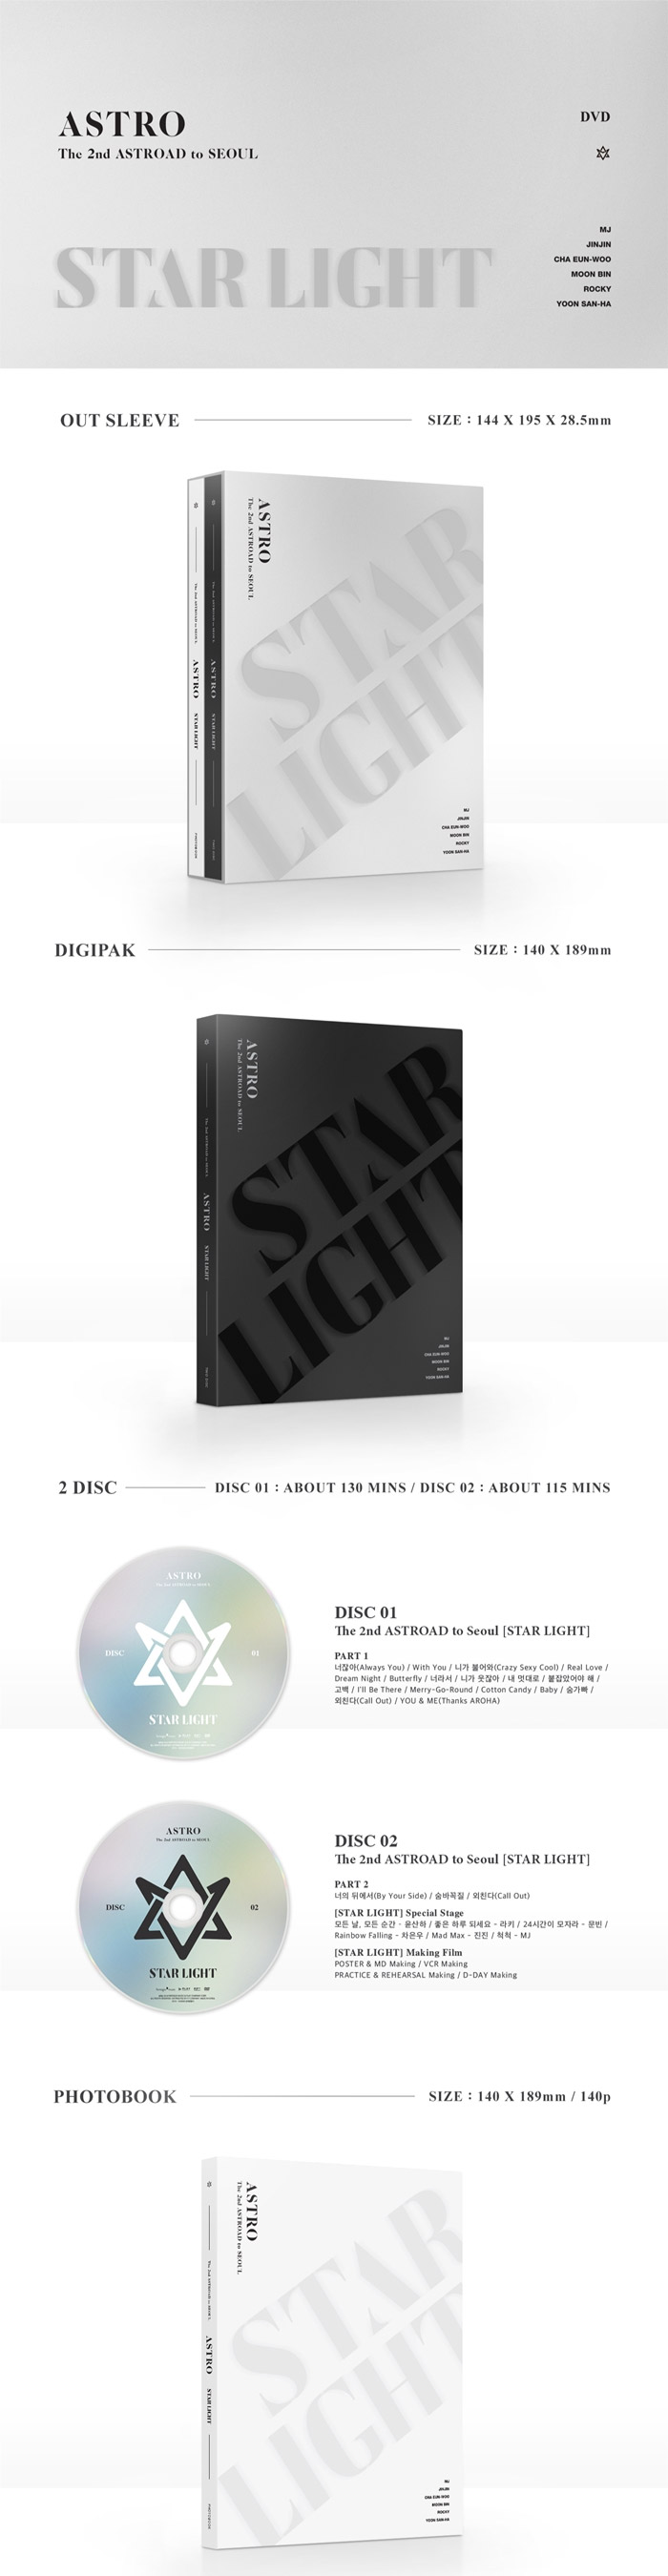 ASTRO THE 2ND ASTROAD TO SEOUL [STAR LIGHT] DVD - ilovekpopshop